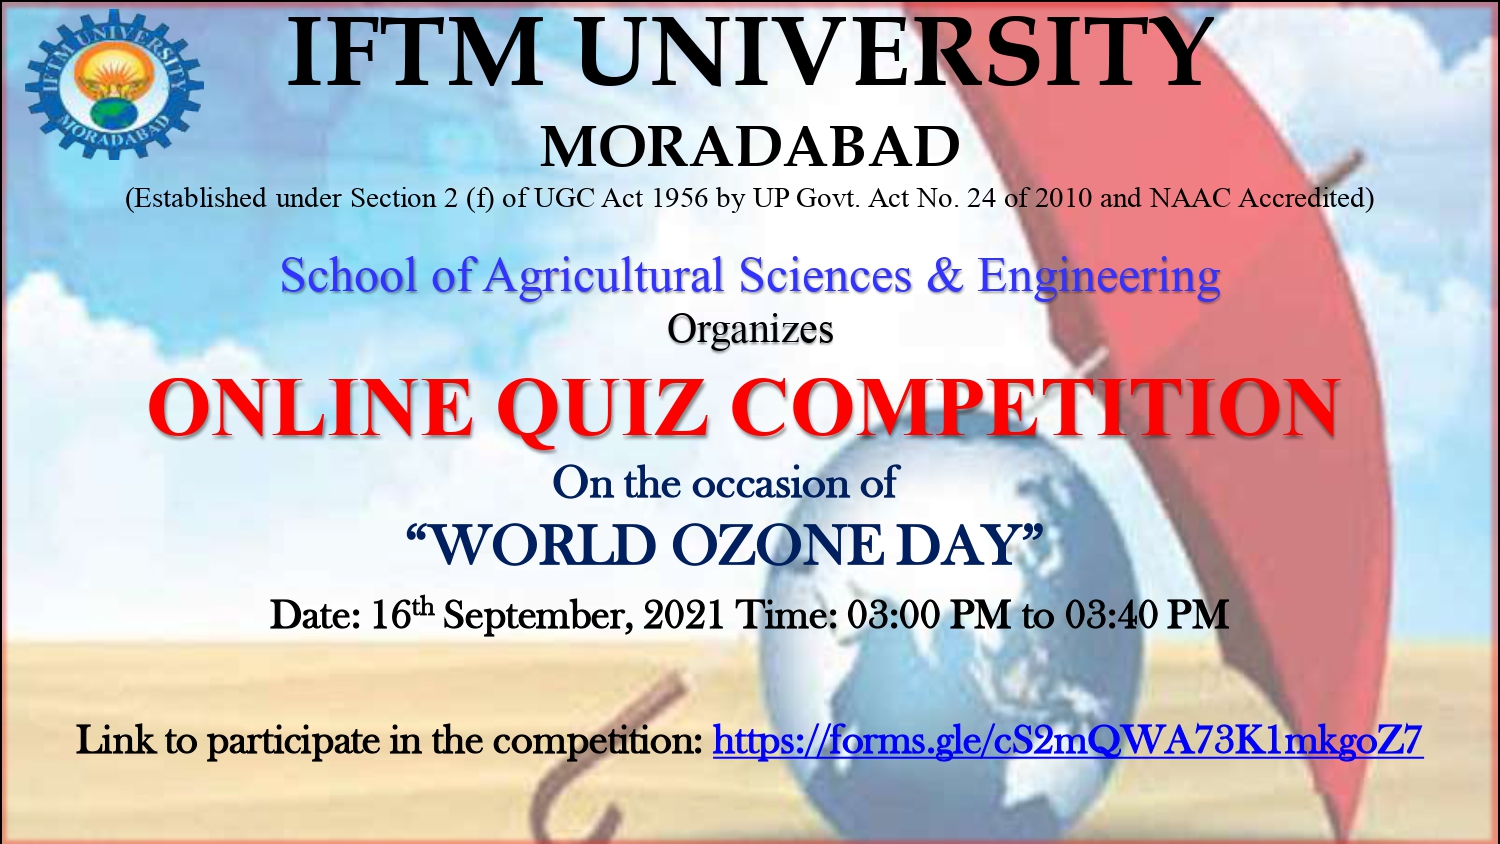 ONLINE QUIZ COMPETITION ON WORLD OZONE DAY 